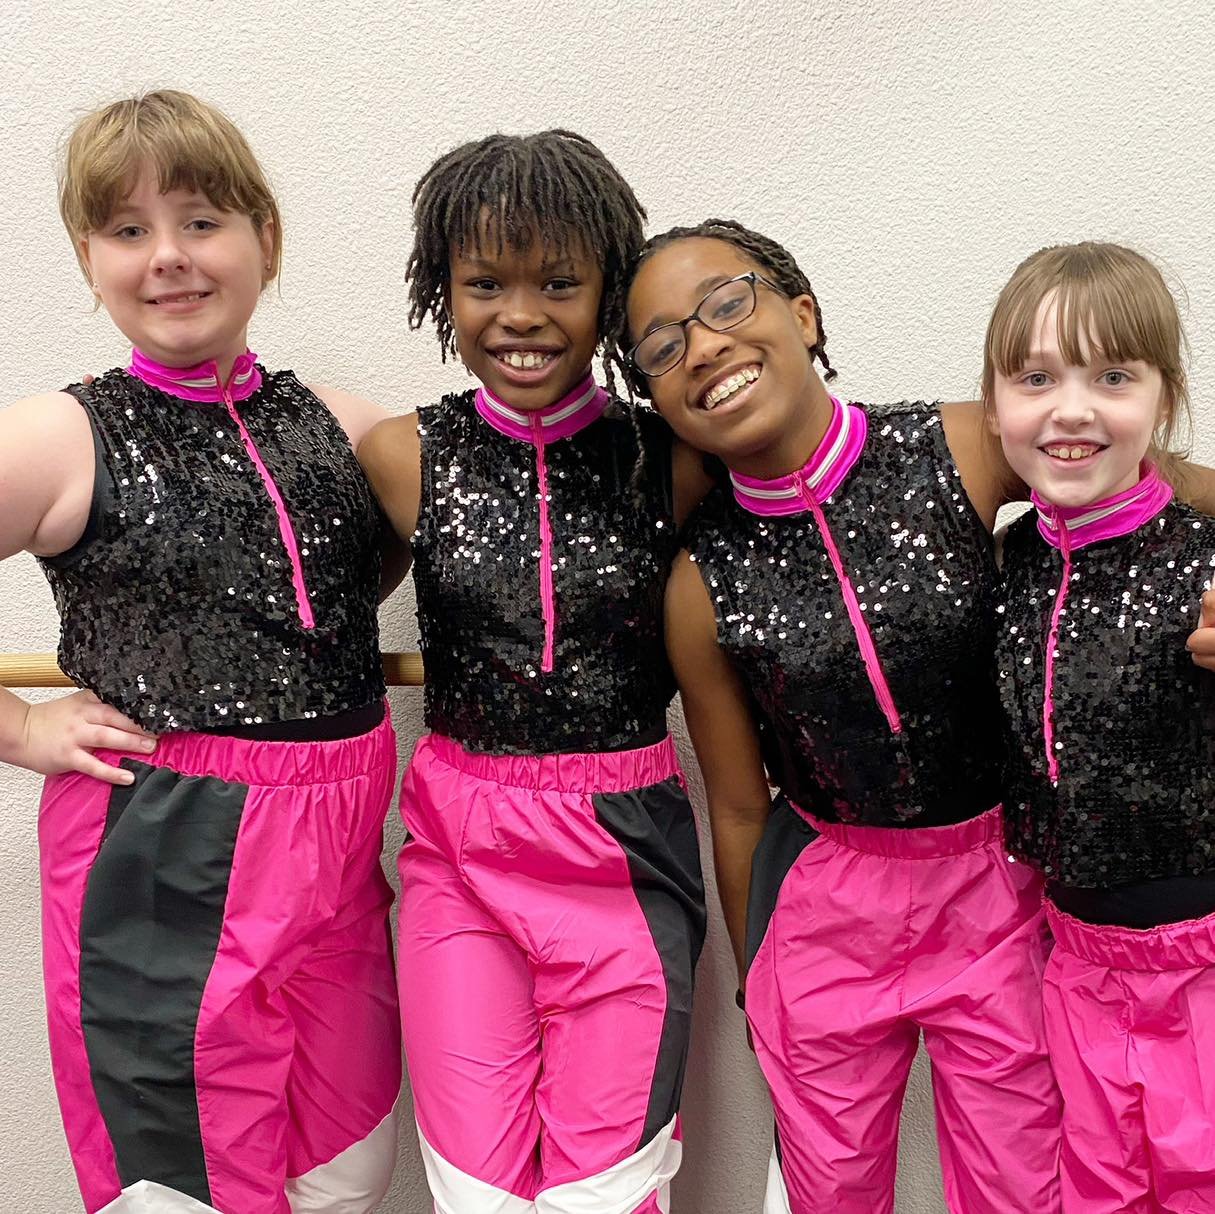 Don&rsquo;t miss out on the summer dance fun at SODC! ☀️🩰 It&rsquo;s not too late to join us for an exciting lineup of camps, classes, and preschool programs. 

Whether your child is a budding ballerina or a hip-hop enthusiast, we have something for